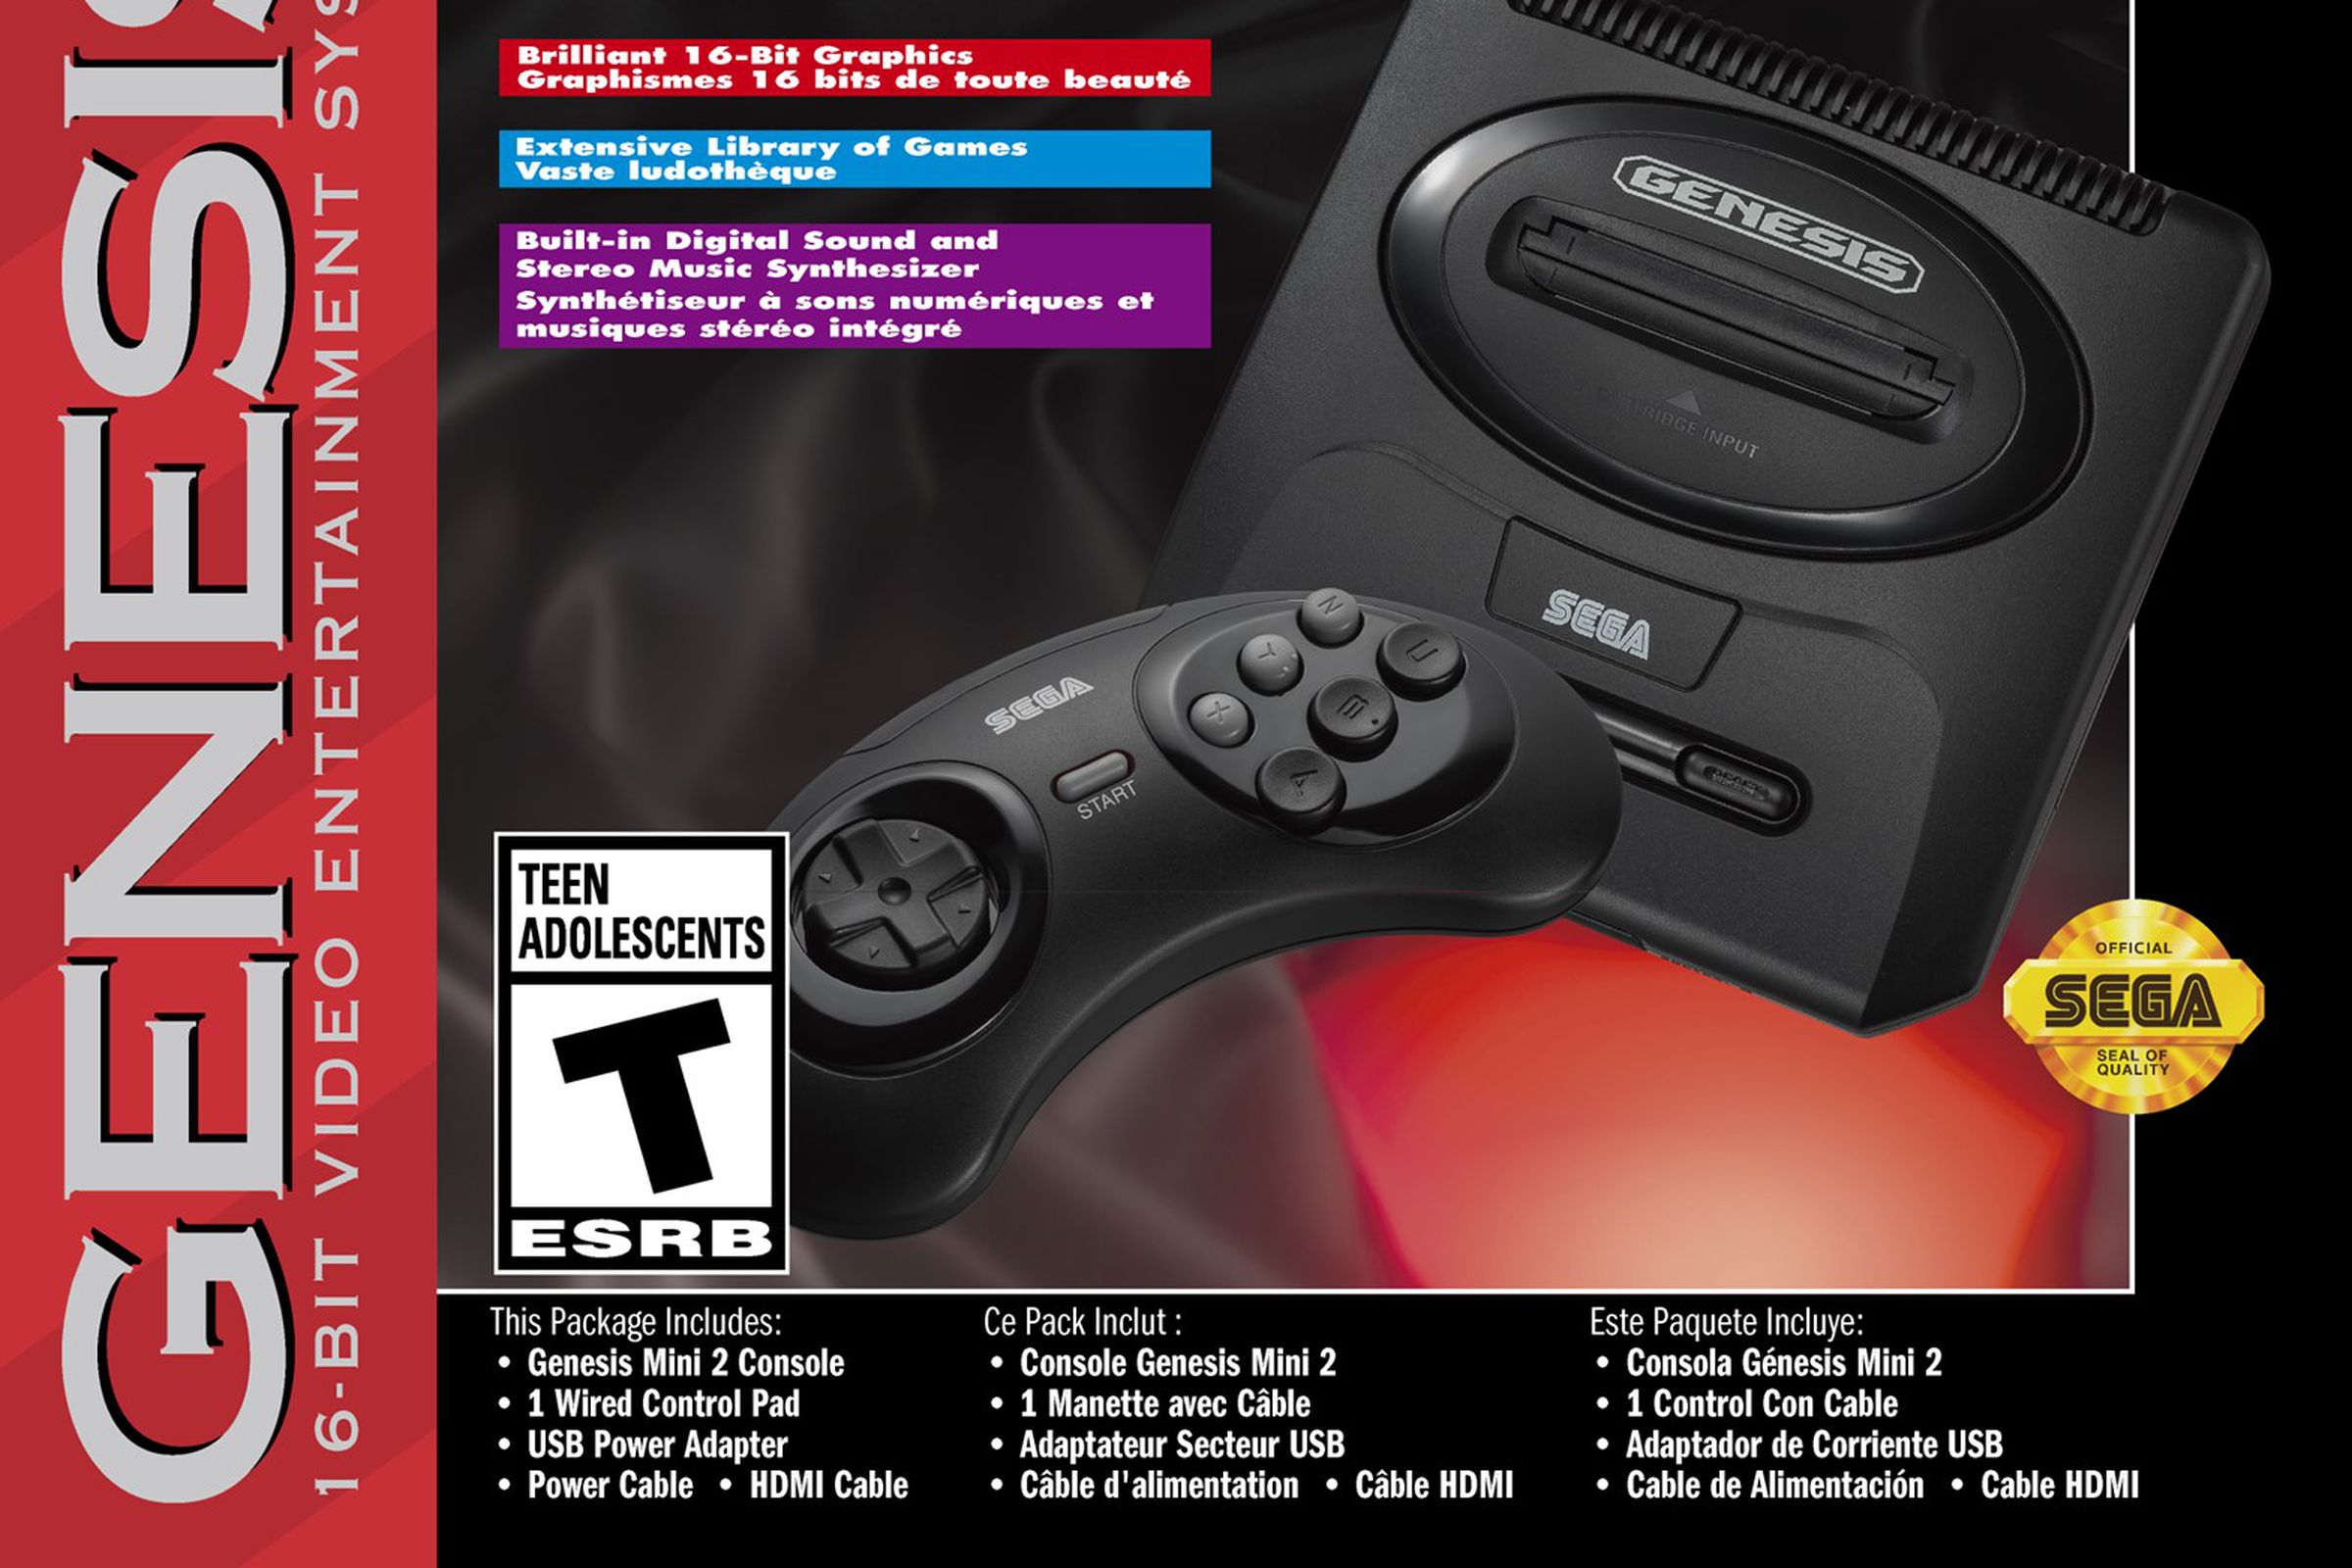 Packshot of the Sega Genesis Mini 2 featuring the console, the six button Genesis controller, and a list of specifications and included accessories